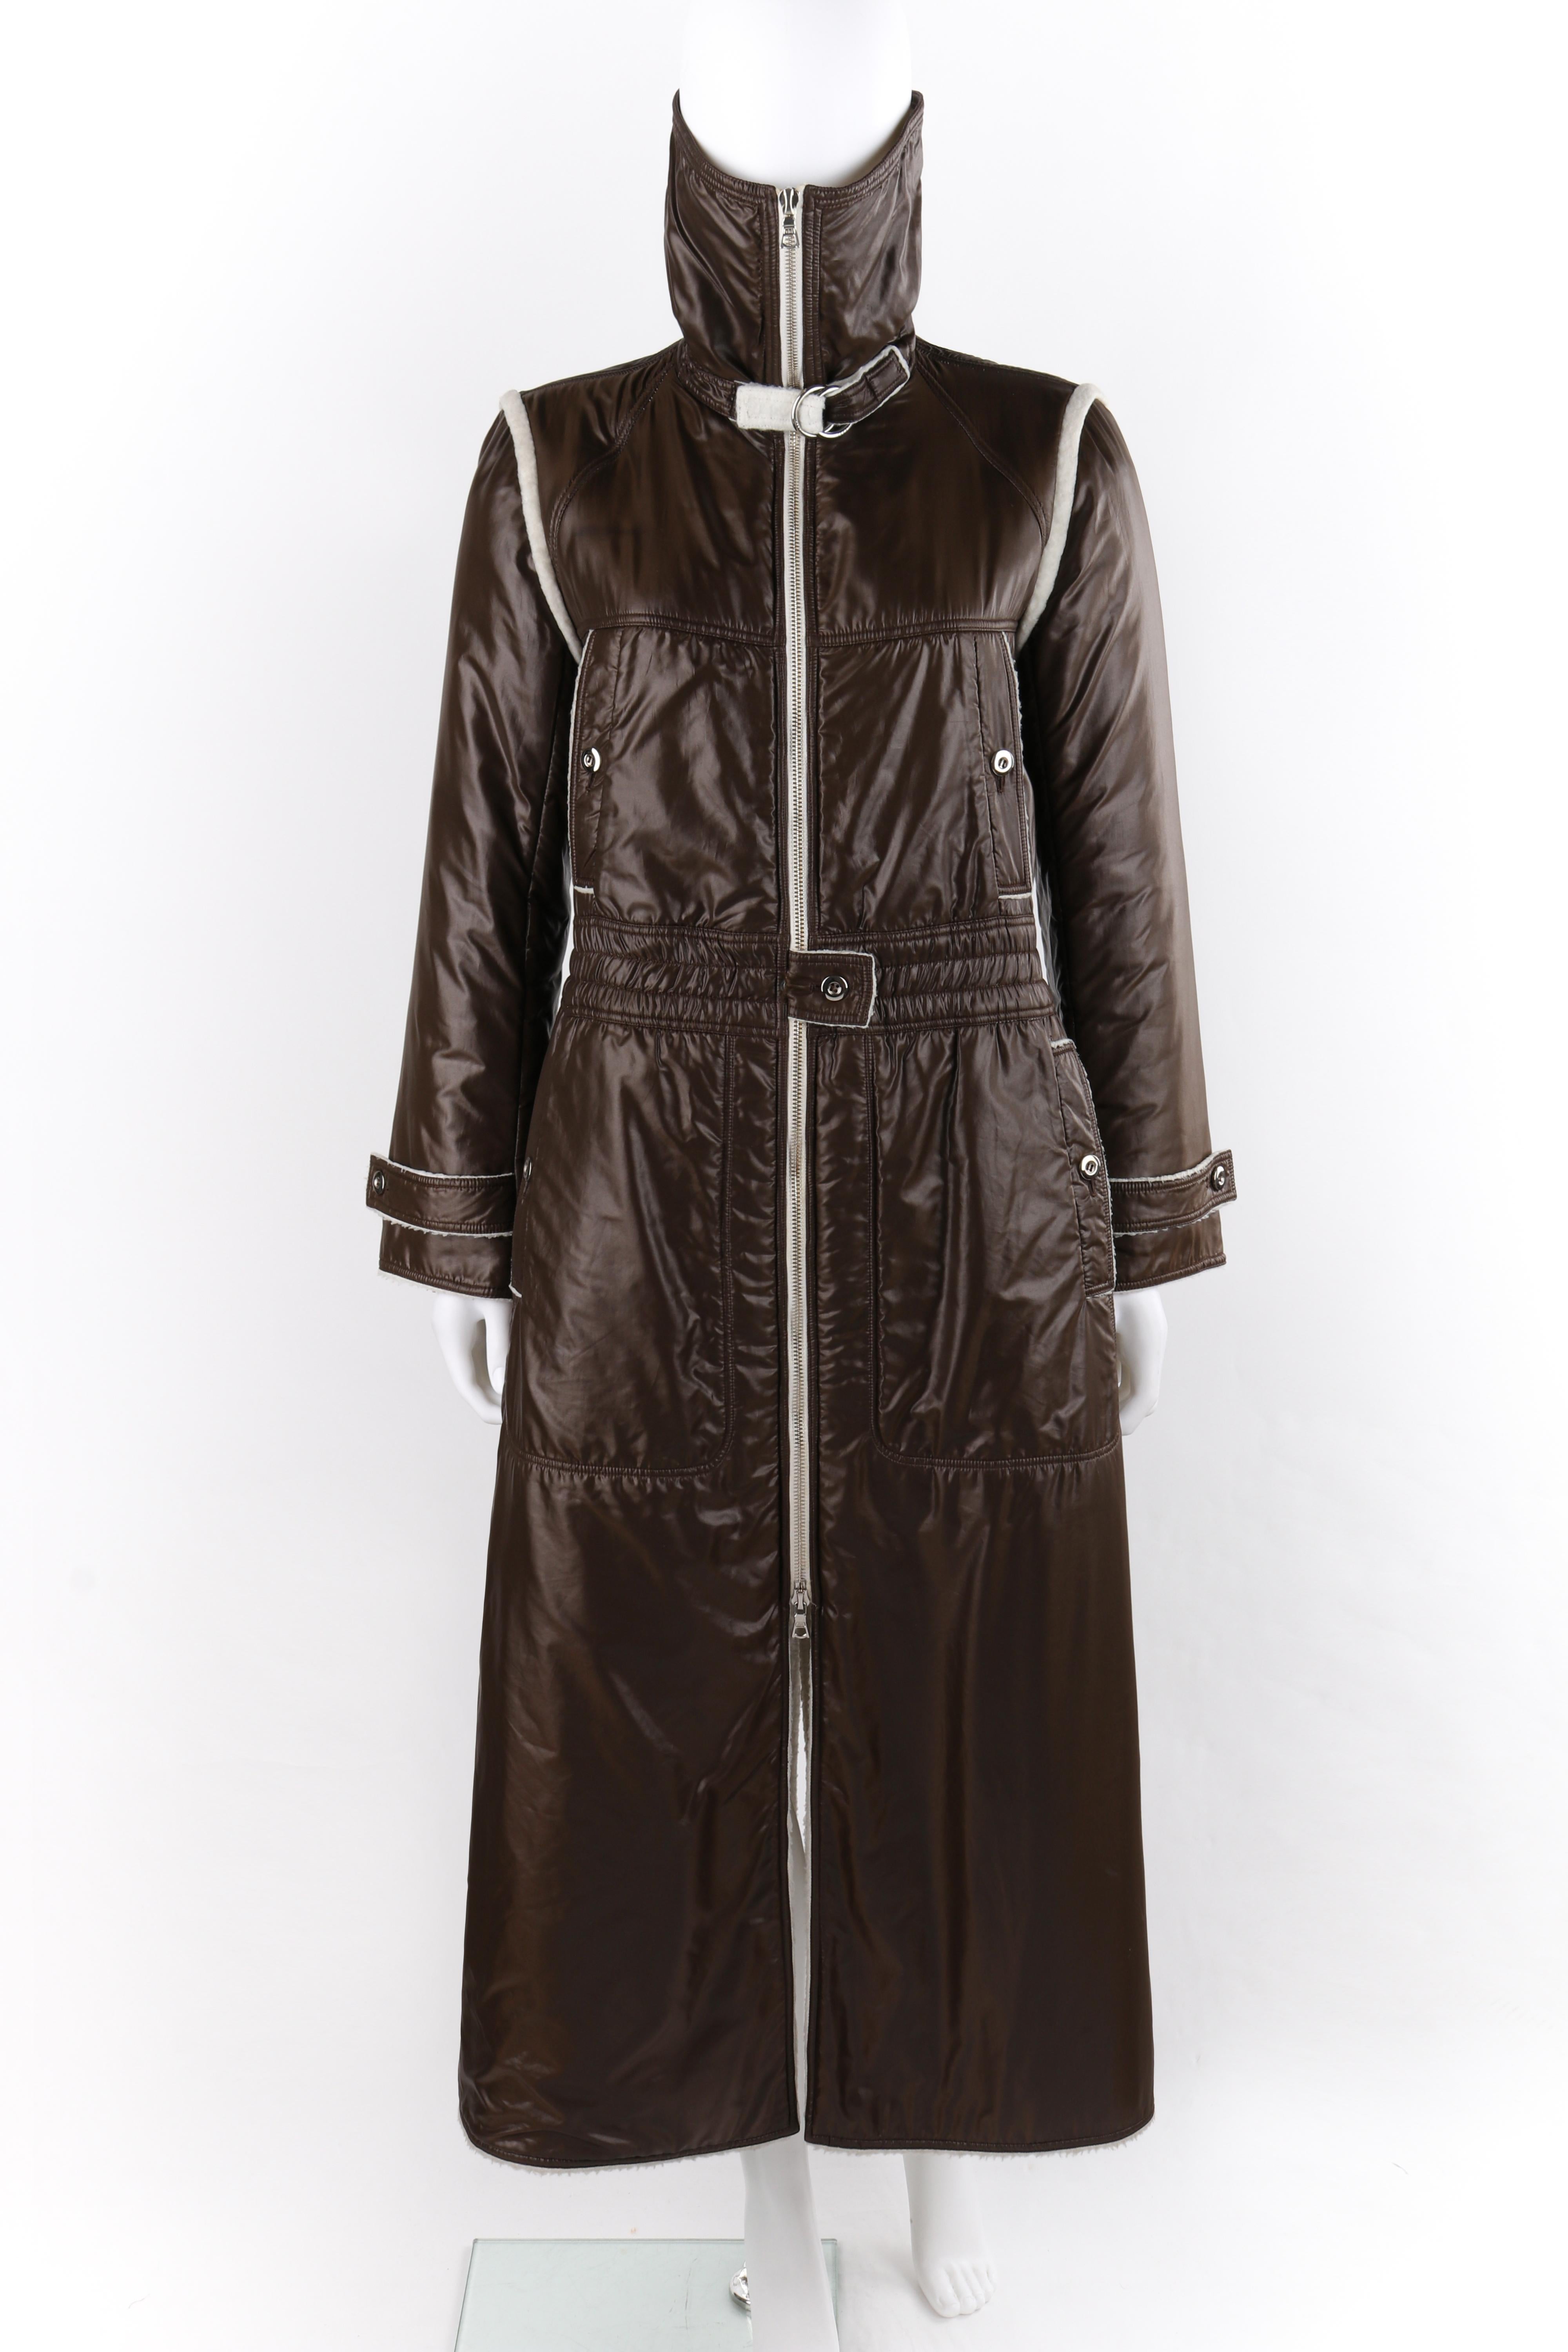 COURREGES c.1970’s Brown White Convertible Collar Full-Length Coat Jacket In Good Condition For Sale In Thiensville, WI